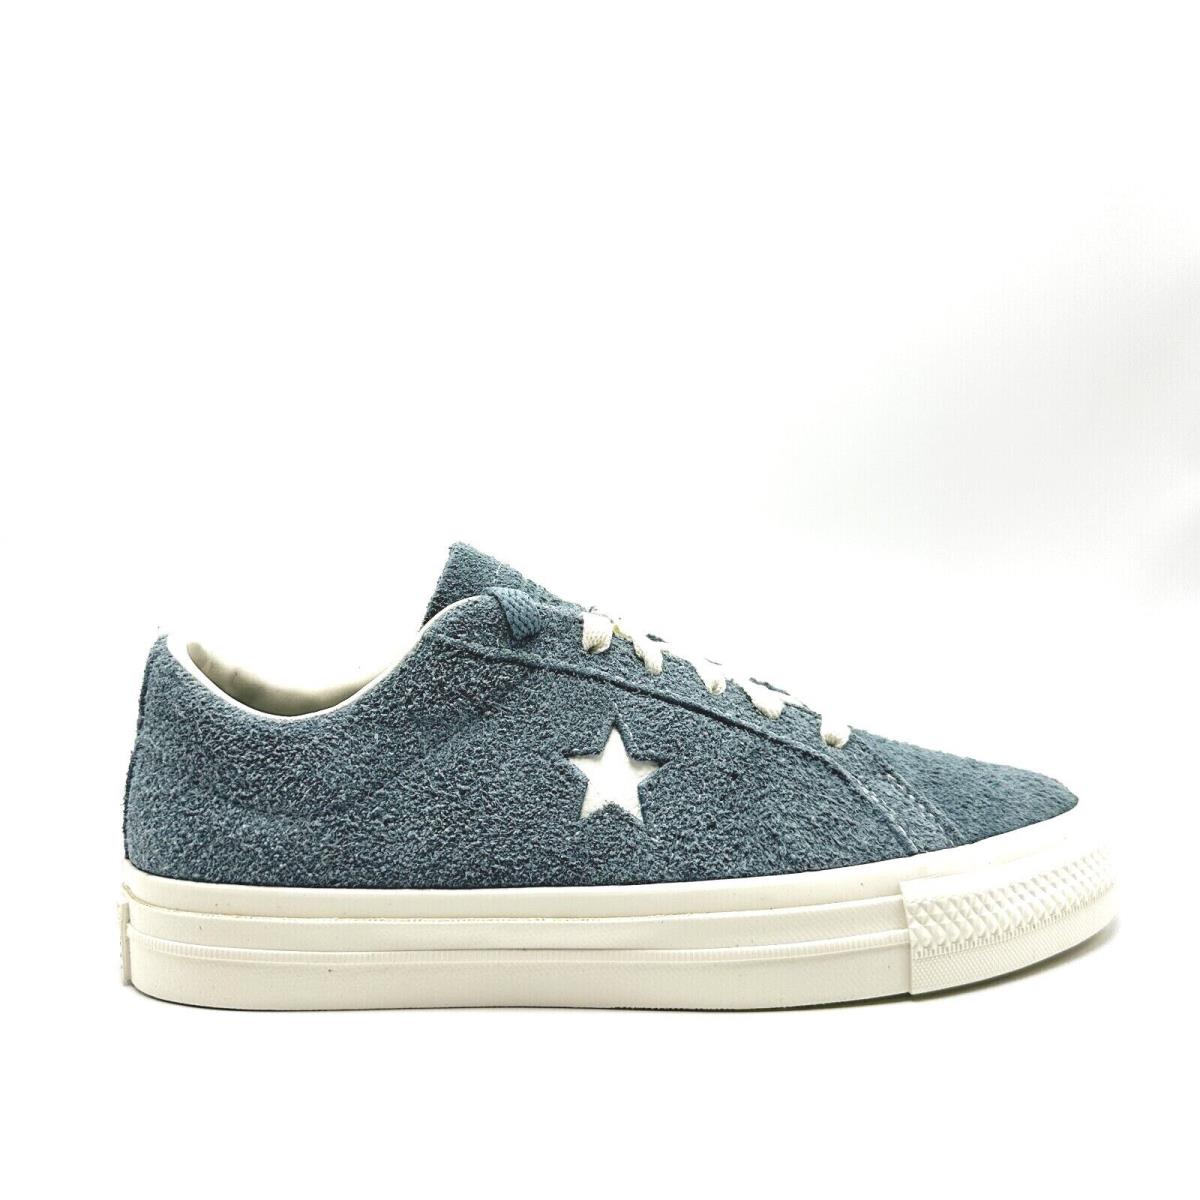 Unisex Converse One Star Pro Skateboard Shoes A06889C